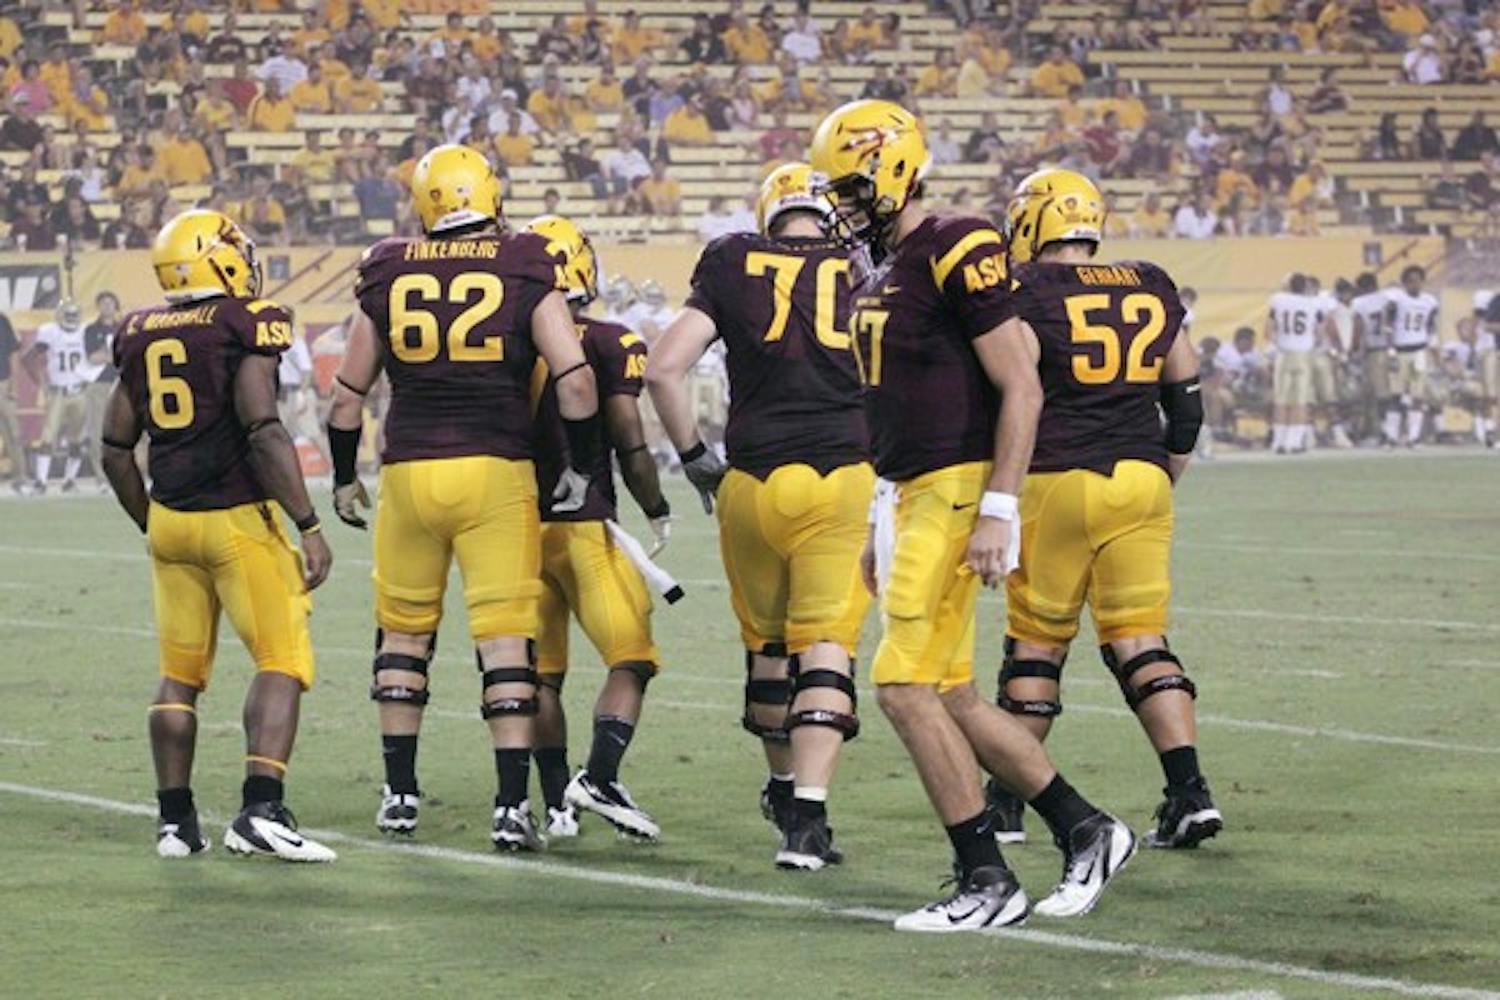 ANOTHER BLOW: ASU sophomore Evan Finkenberg (62) and the rest of the Sun Devil offense walk up to the line of scrimmage during ASU’s win over UC Davis on Sept. 1. Finkenberg will be out for four to six weeks due to a knee injury. (Photo by Beth Easterbrook)